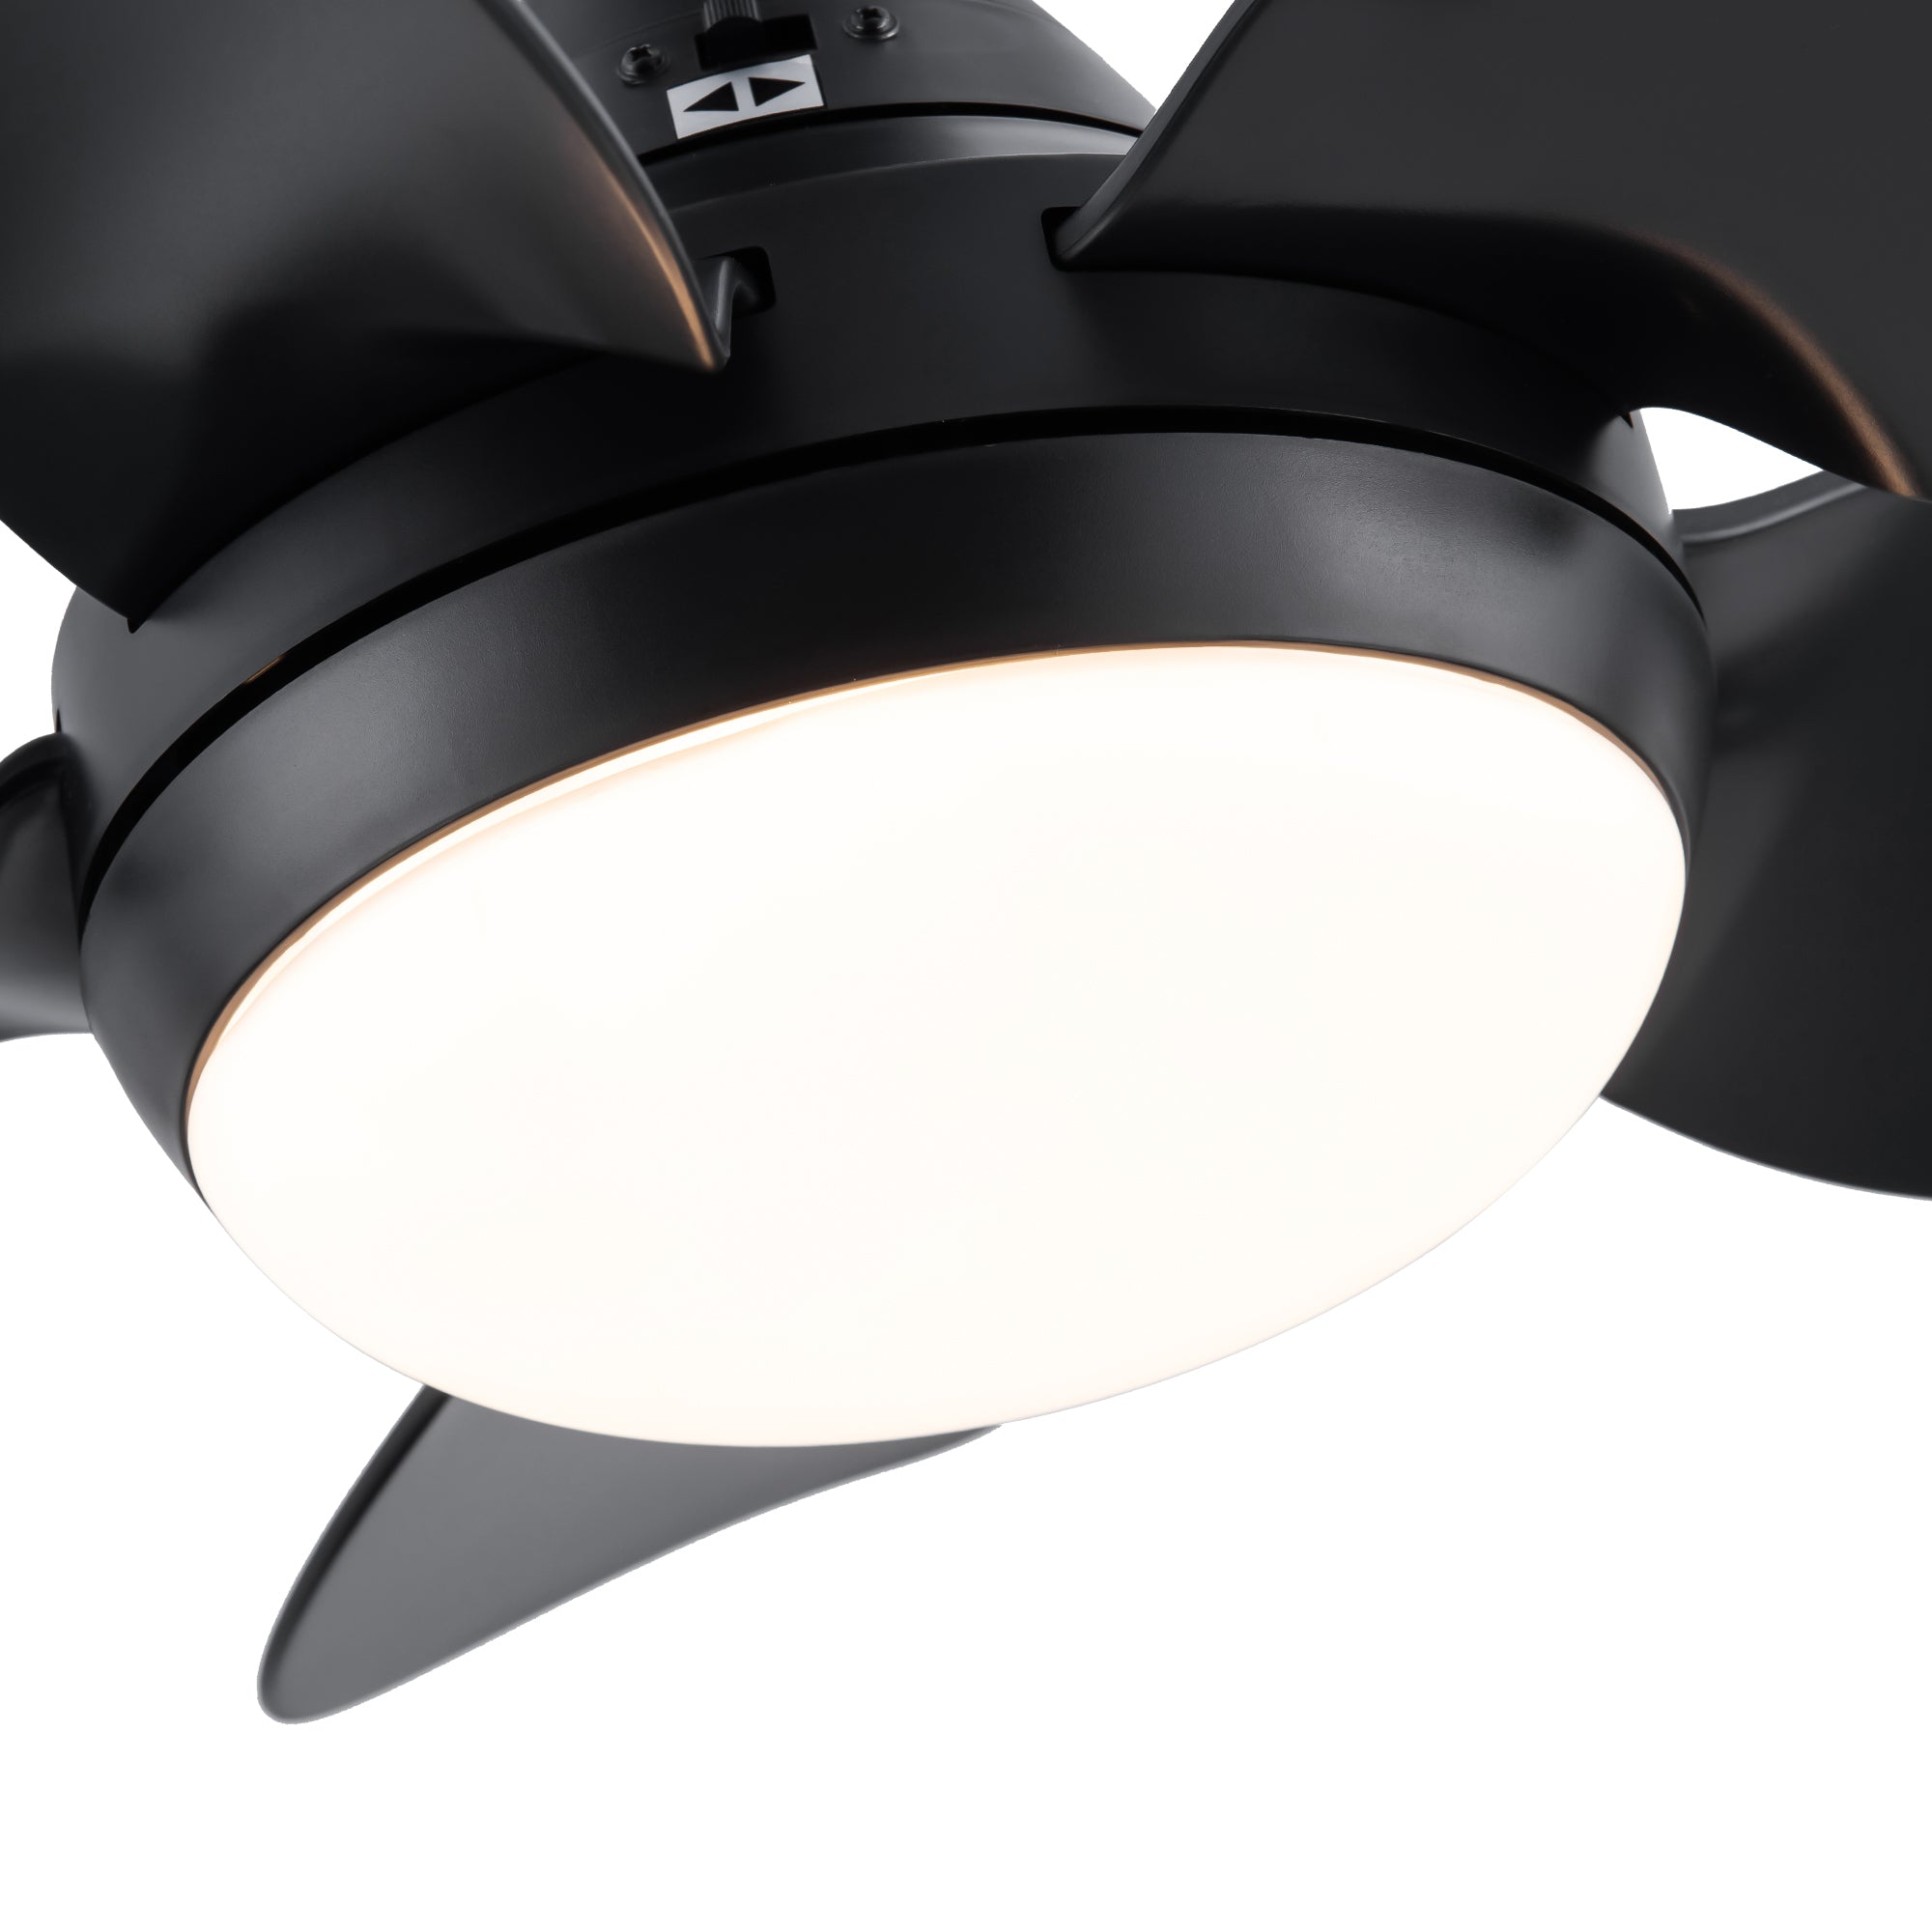 30 In Intergrated LED Ceiling Fan Lighting with Matte black-abs